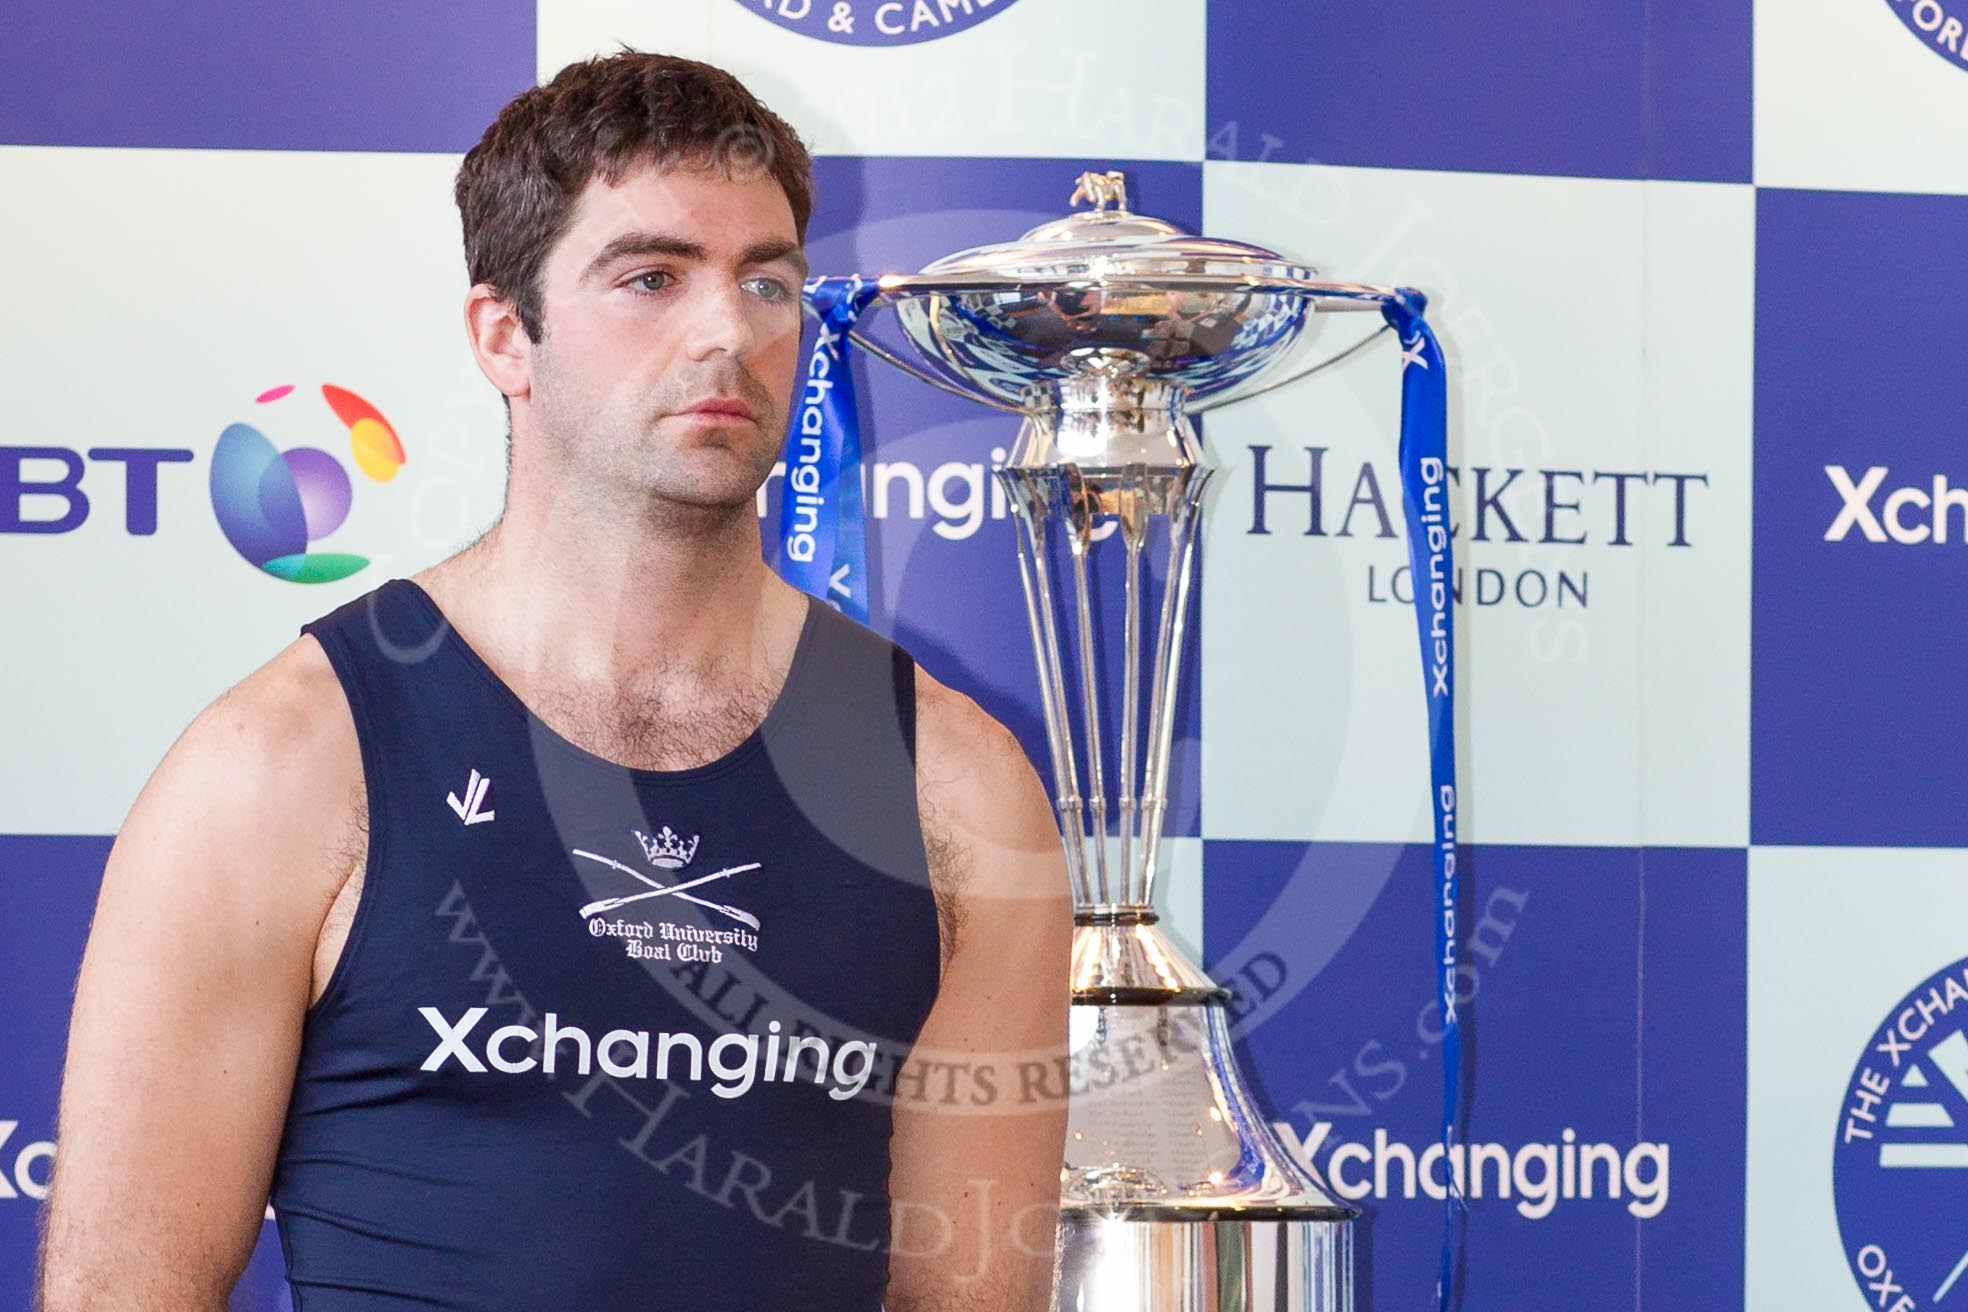 The Boat Race season 2012 - Crew Announcement and Weigh In: Oxford: 3 Kevin Baum, American, 91.6kg..
Forman's Fish Island,
London E3,

United Kingdom,
on 05 March 2012 at 10:13, image #15